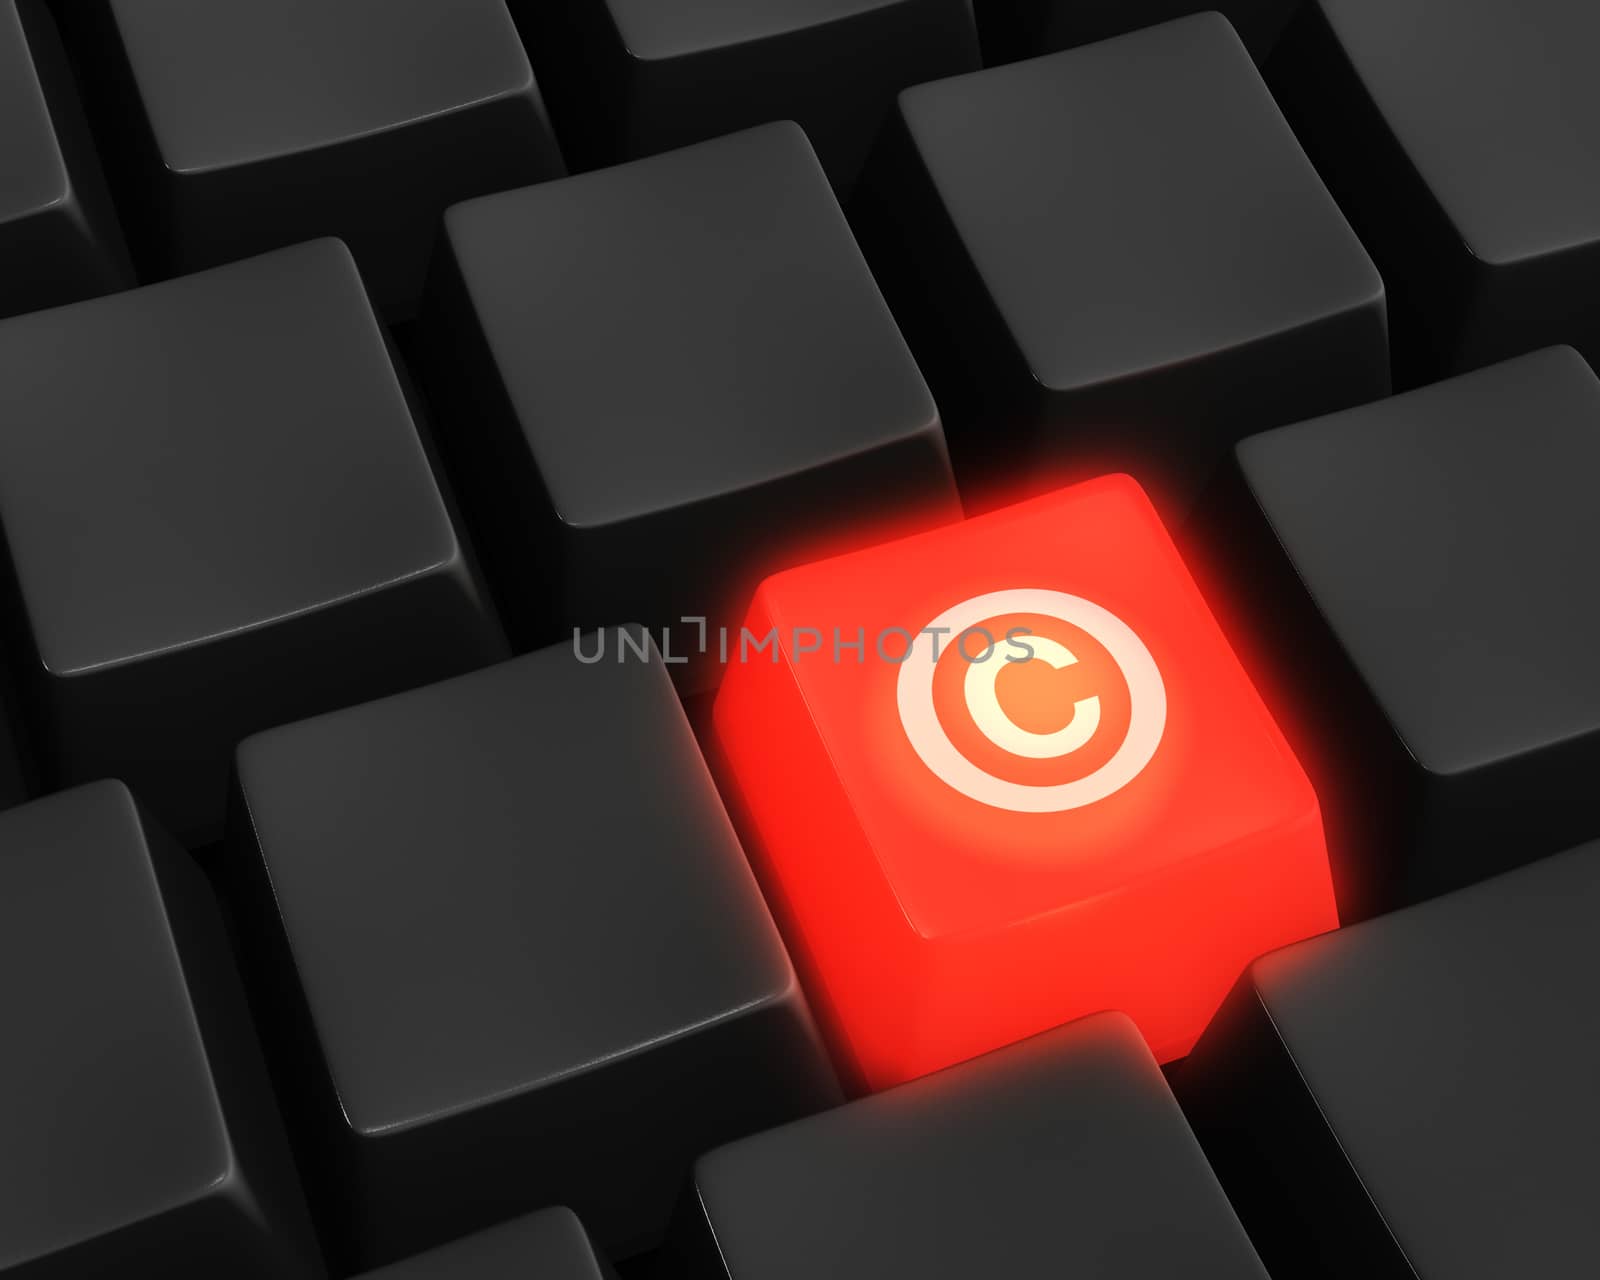 Close up photo-real illustration of unlabeled, black computer keyboard keys surrounding a single red glowing key labeled with the copyright symbol.